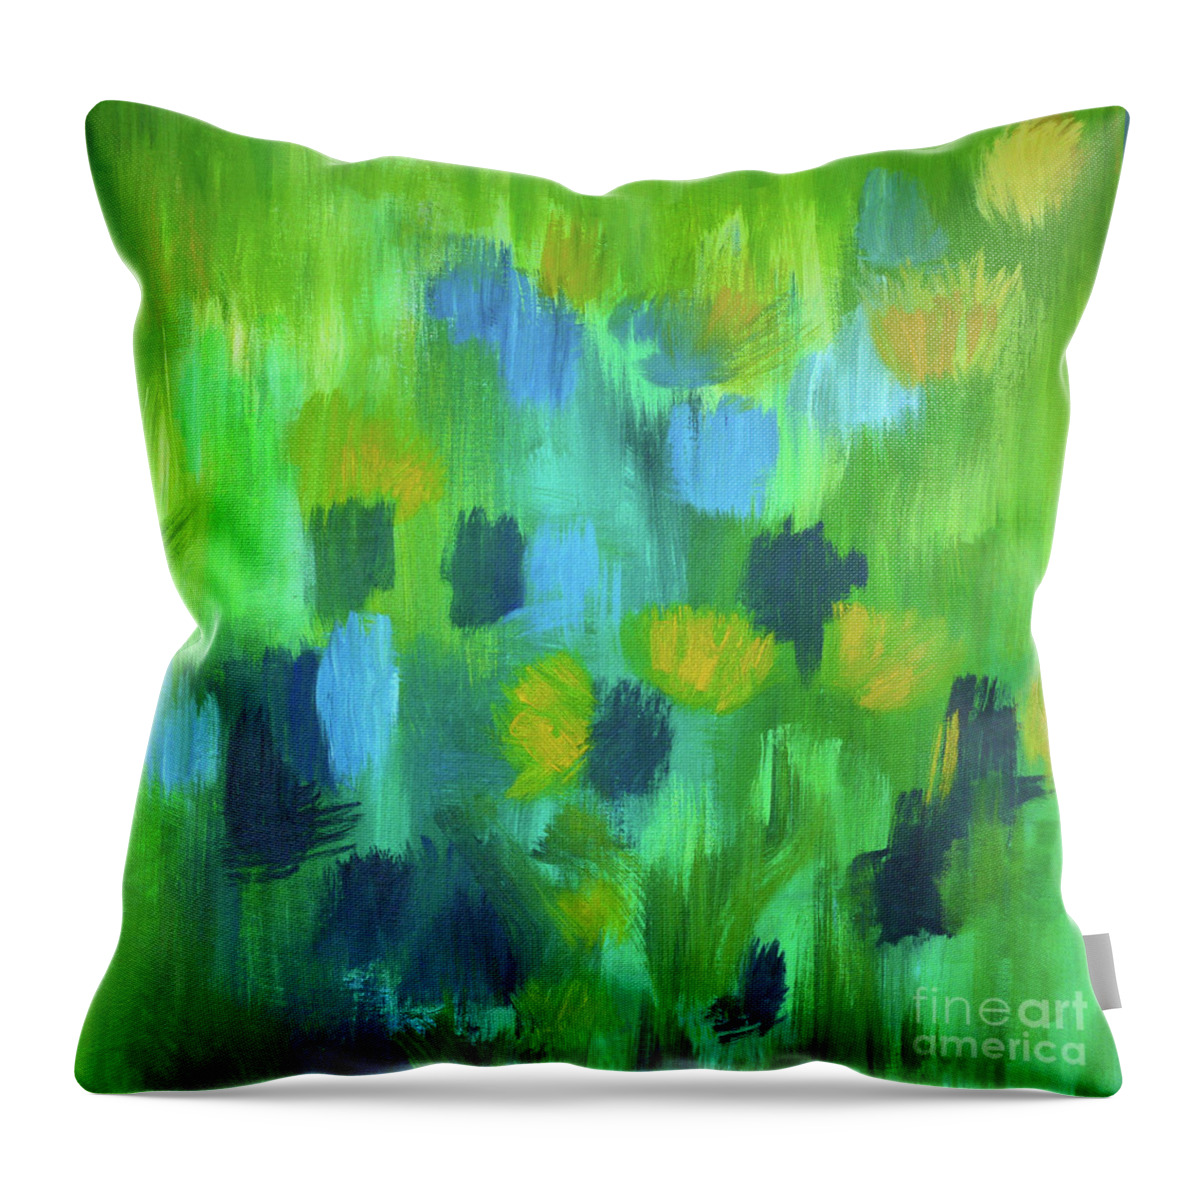 Seedtime Throw Pillow featuring the painting Seedtime Green by Julia Underwood